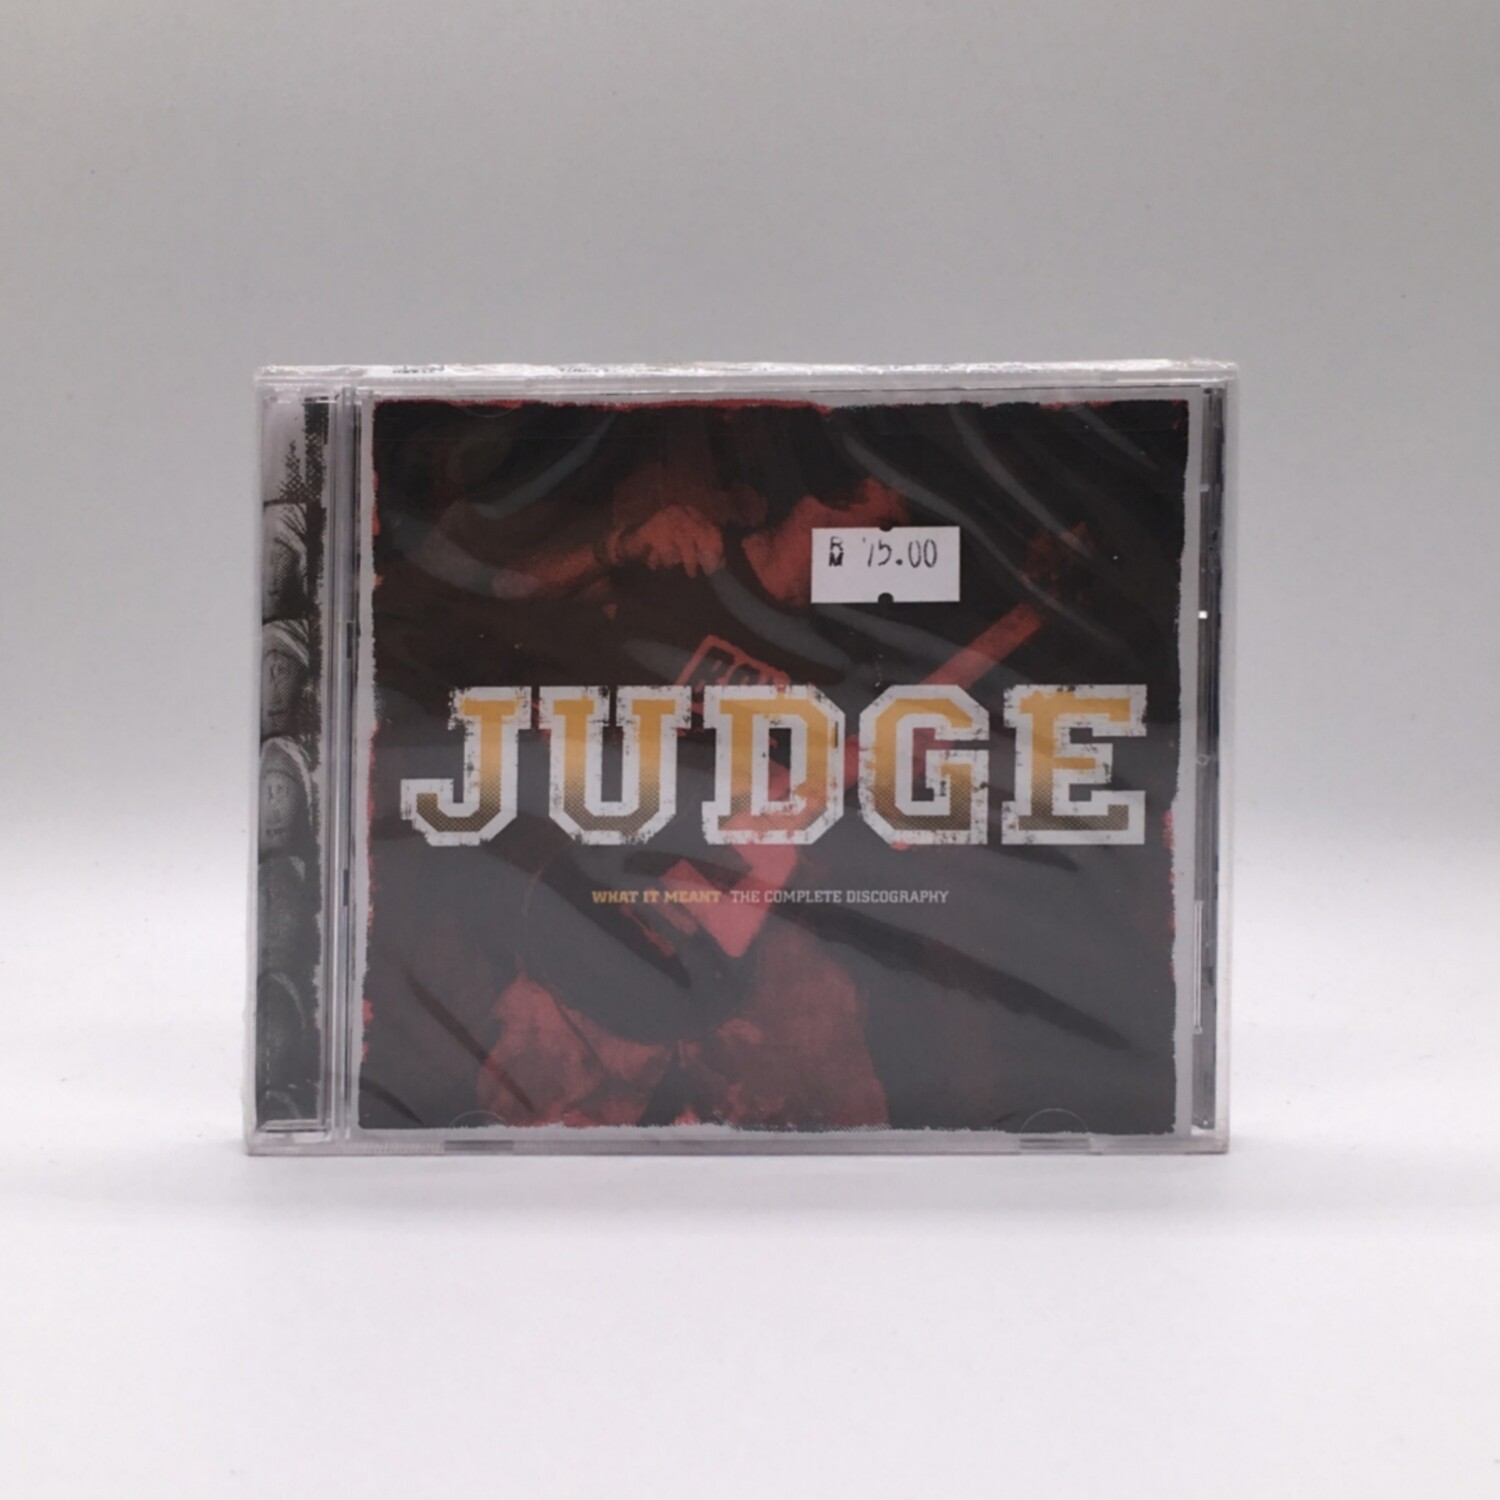 JUDGE -WHAT IT MEANT: COMPLETE DISCOGRAPHY- CD